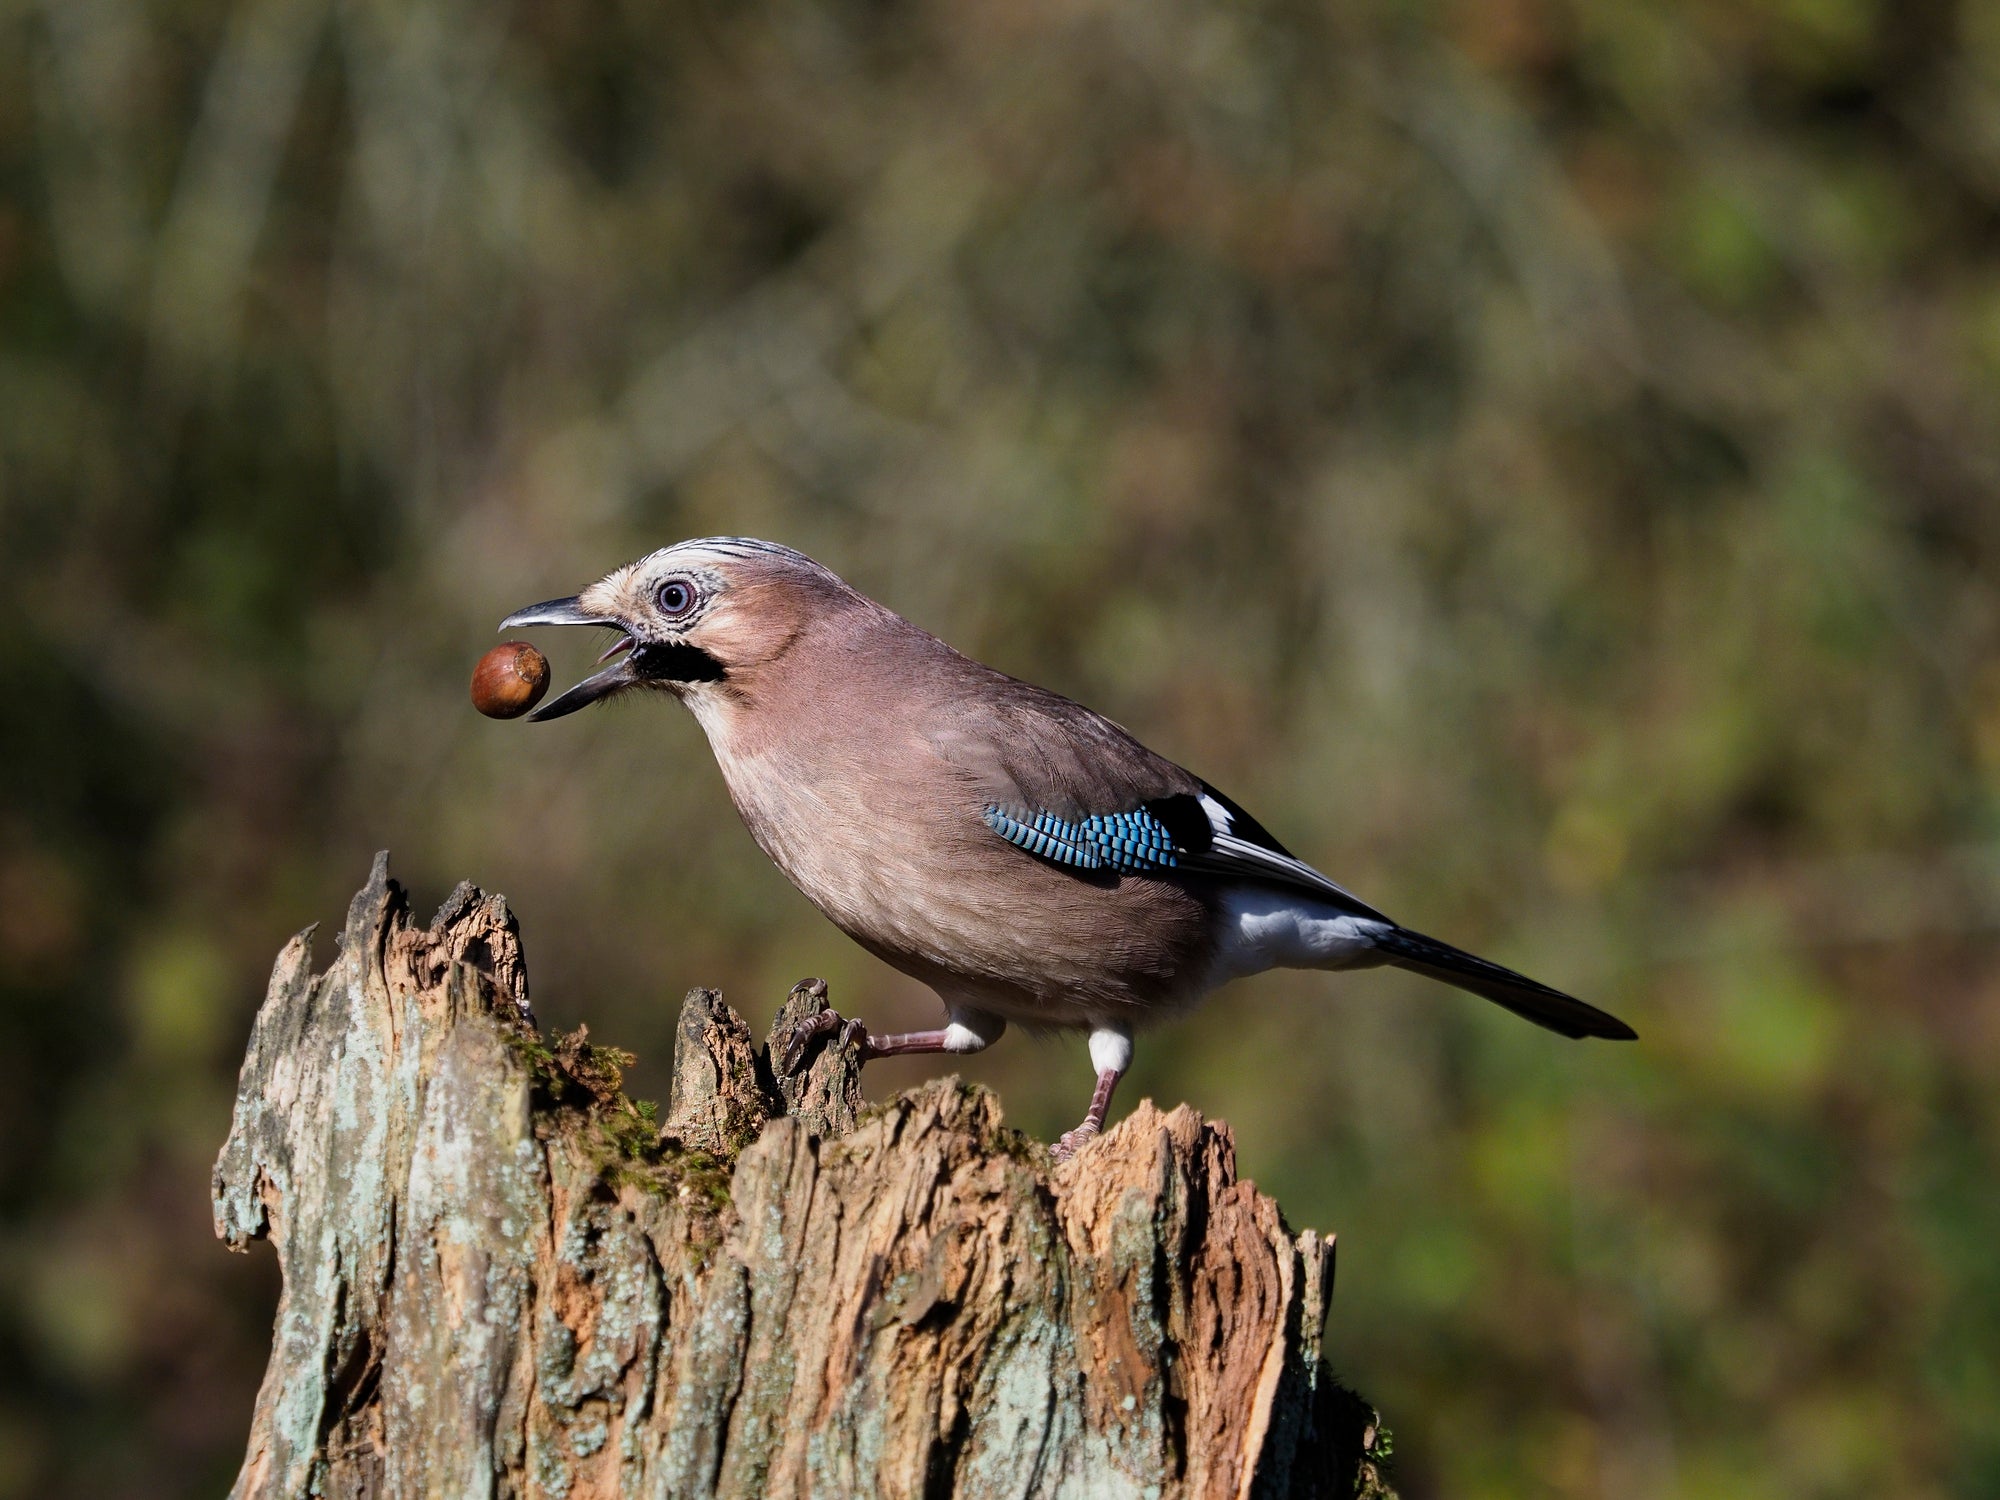 Jays may be responsible for planting as many as one in two oak trees, and research suggests they cultivate young oaks to feed fresh new leaves to their chicks